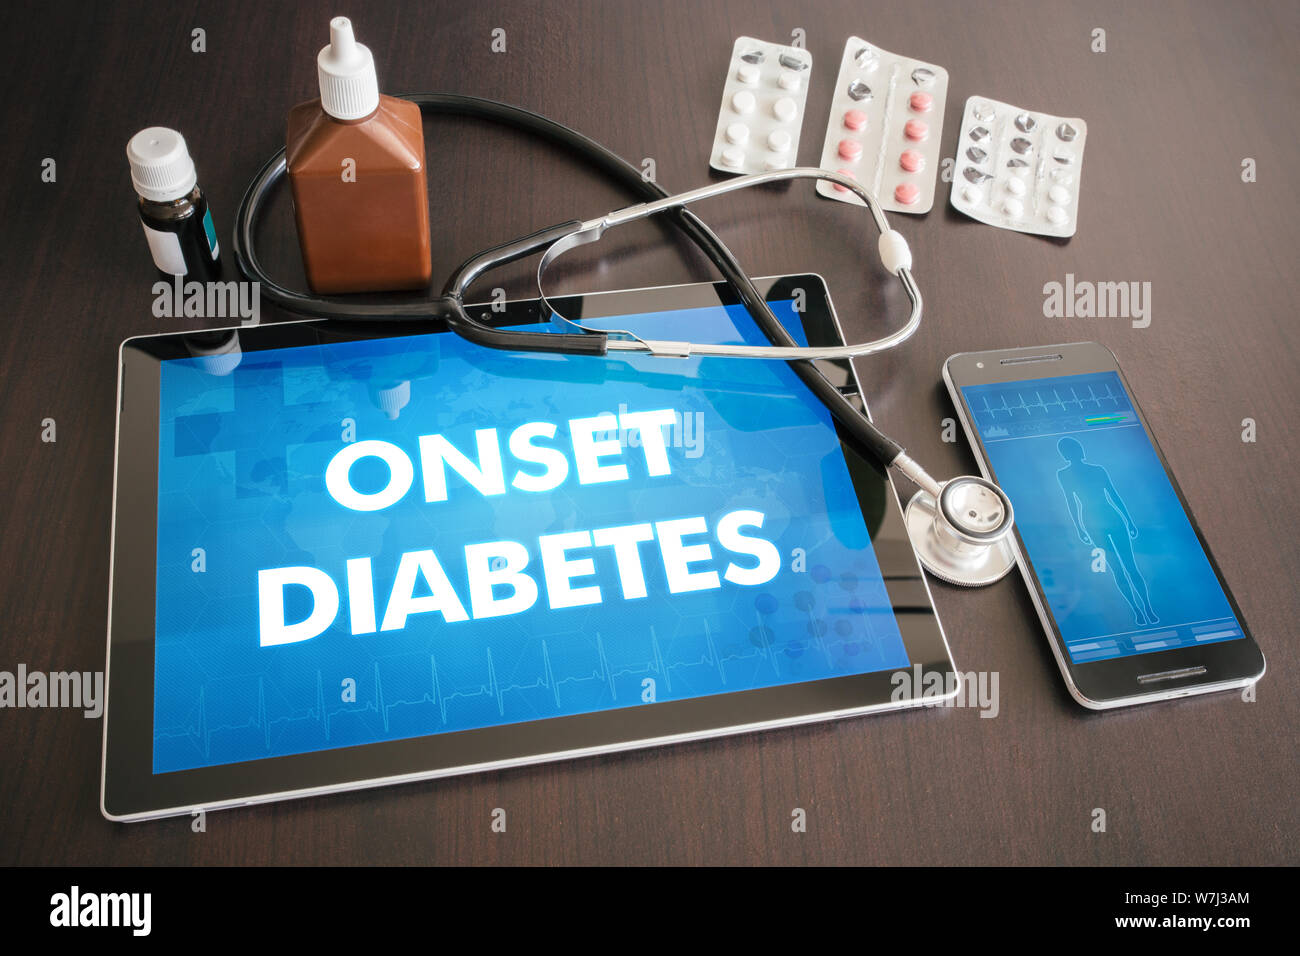 Onset diabetes (endocrine disease) diagnosis medical concept on tablet screen with stethoscope. Stock Photo